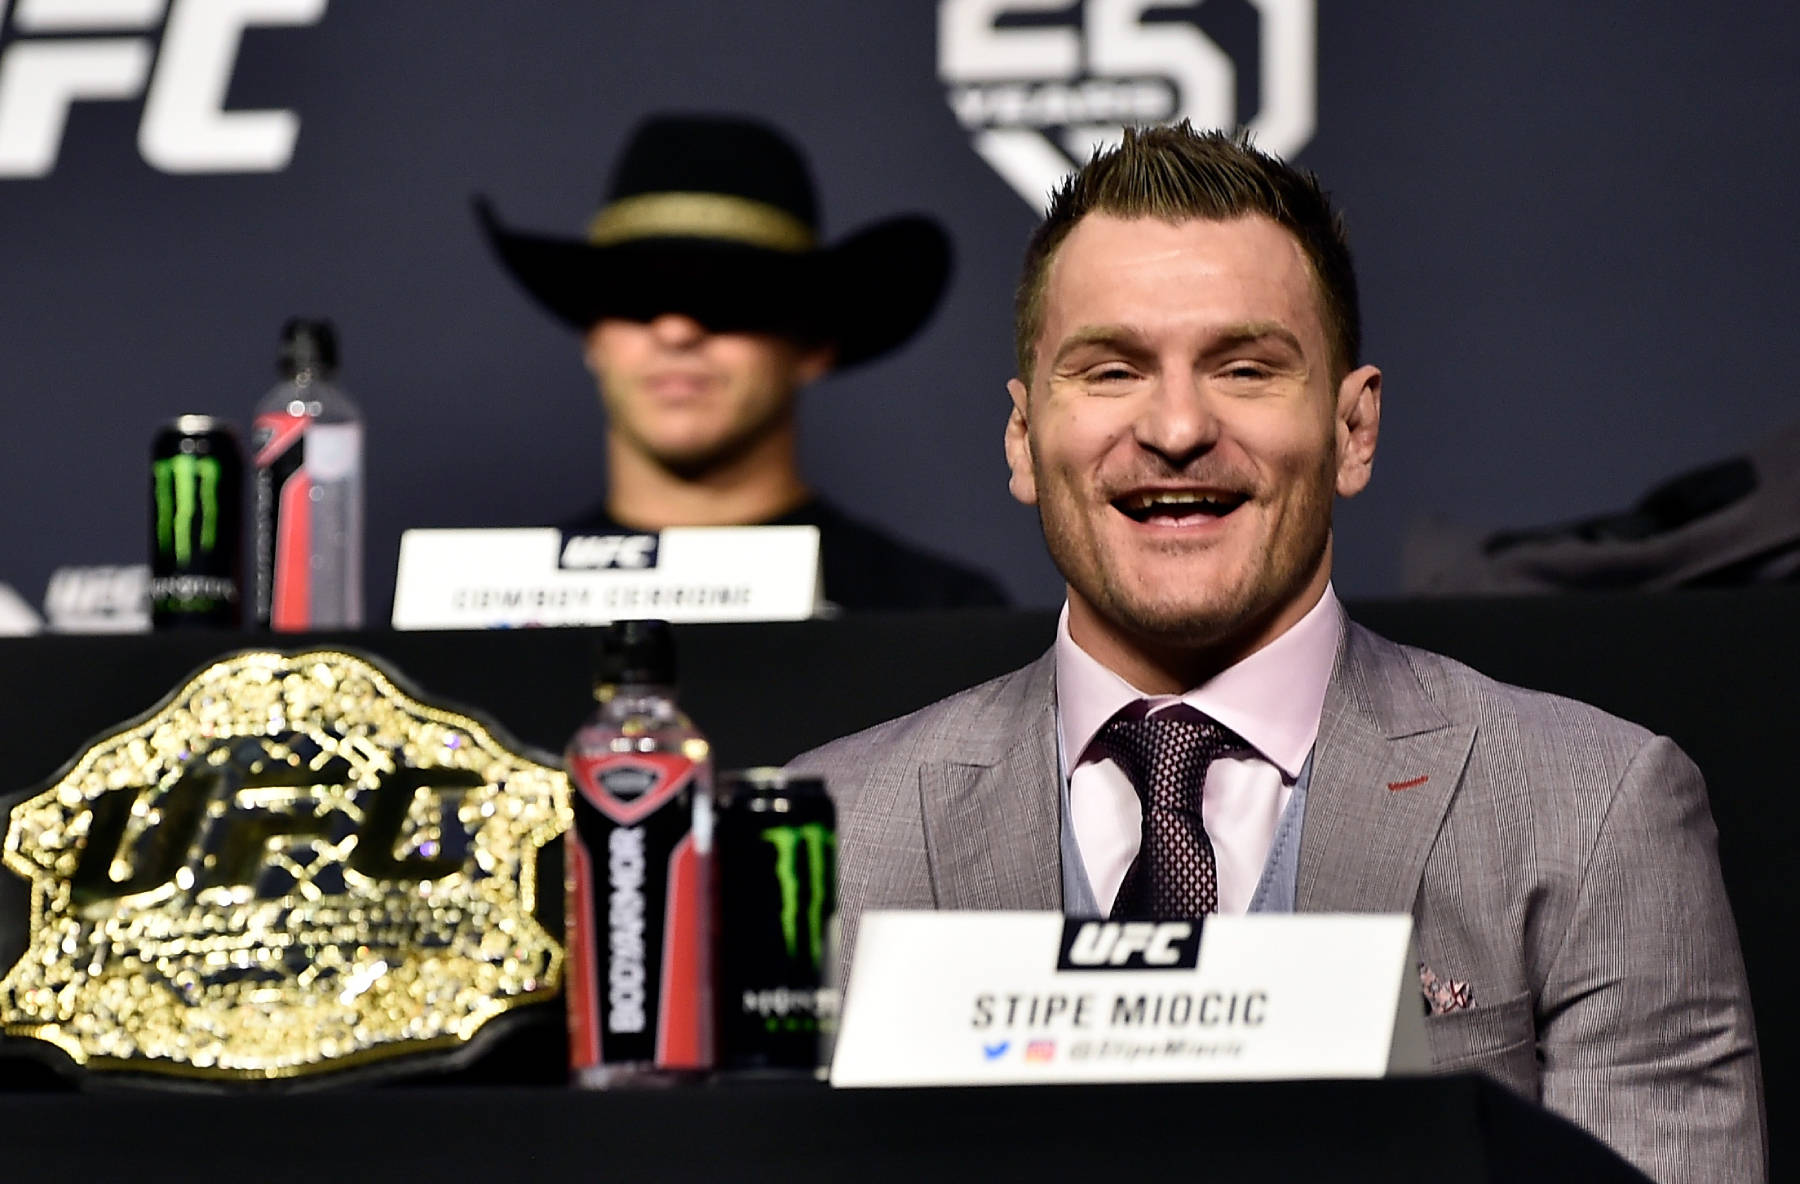 Stipe Miocic Smiling At Conference Wallpaper